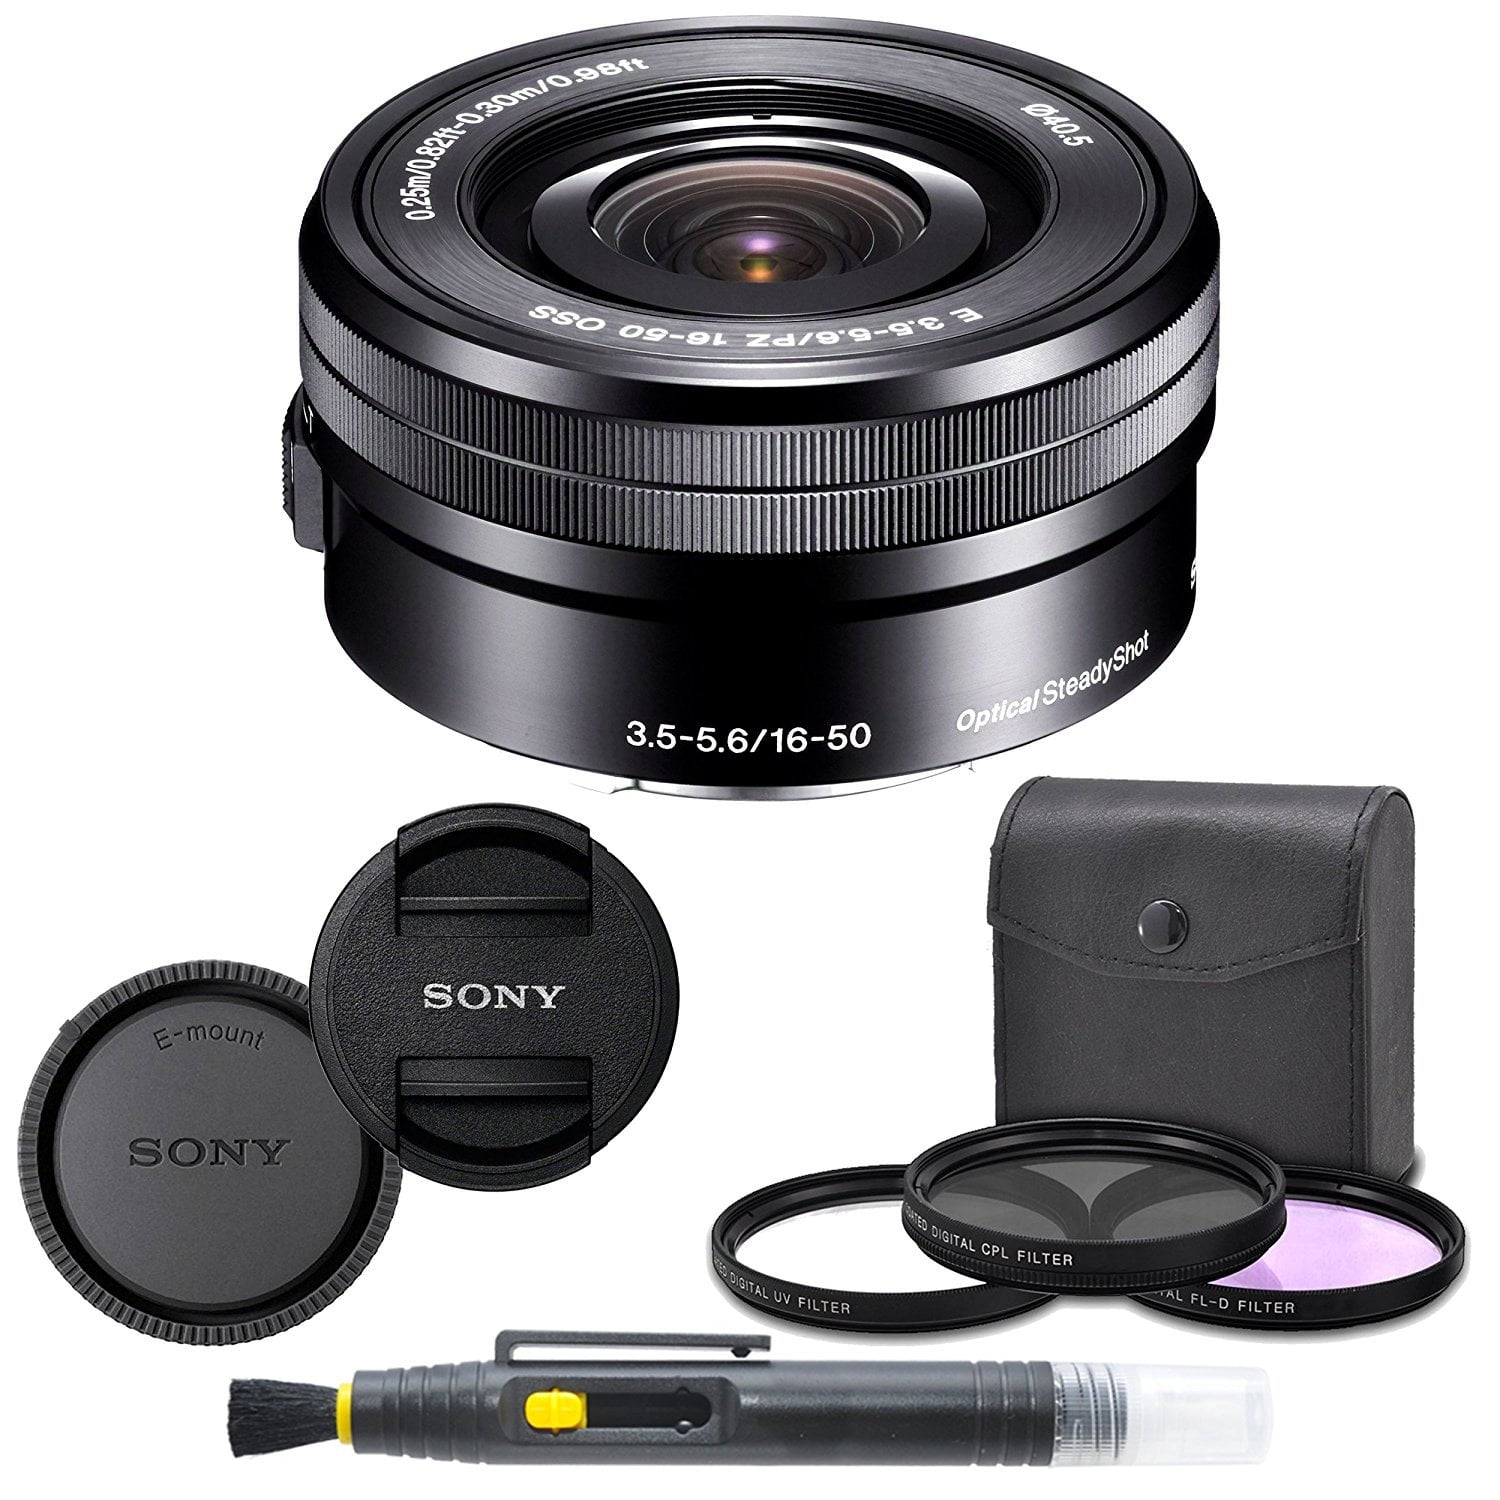 Sony SELP1650 16-50mm Power Zoom Lens (Black) + 8PC Kit Includes 3 Piece  Filter Kit (UV-CPL-FLD) + Front & Rear Lens Caps + Cleaning Pen - Sony E PZ  